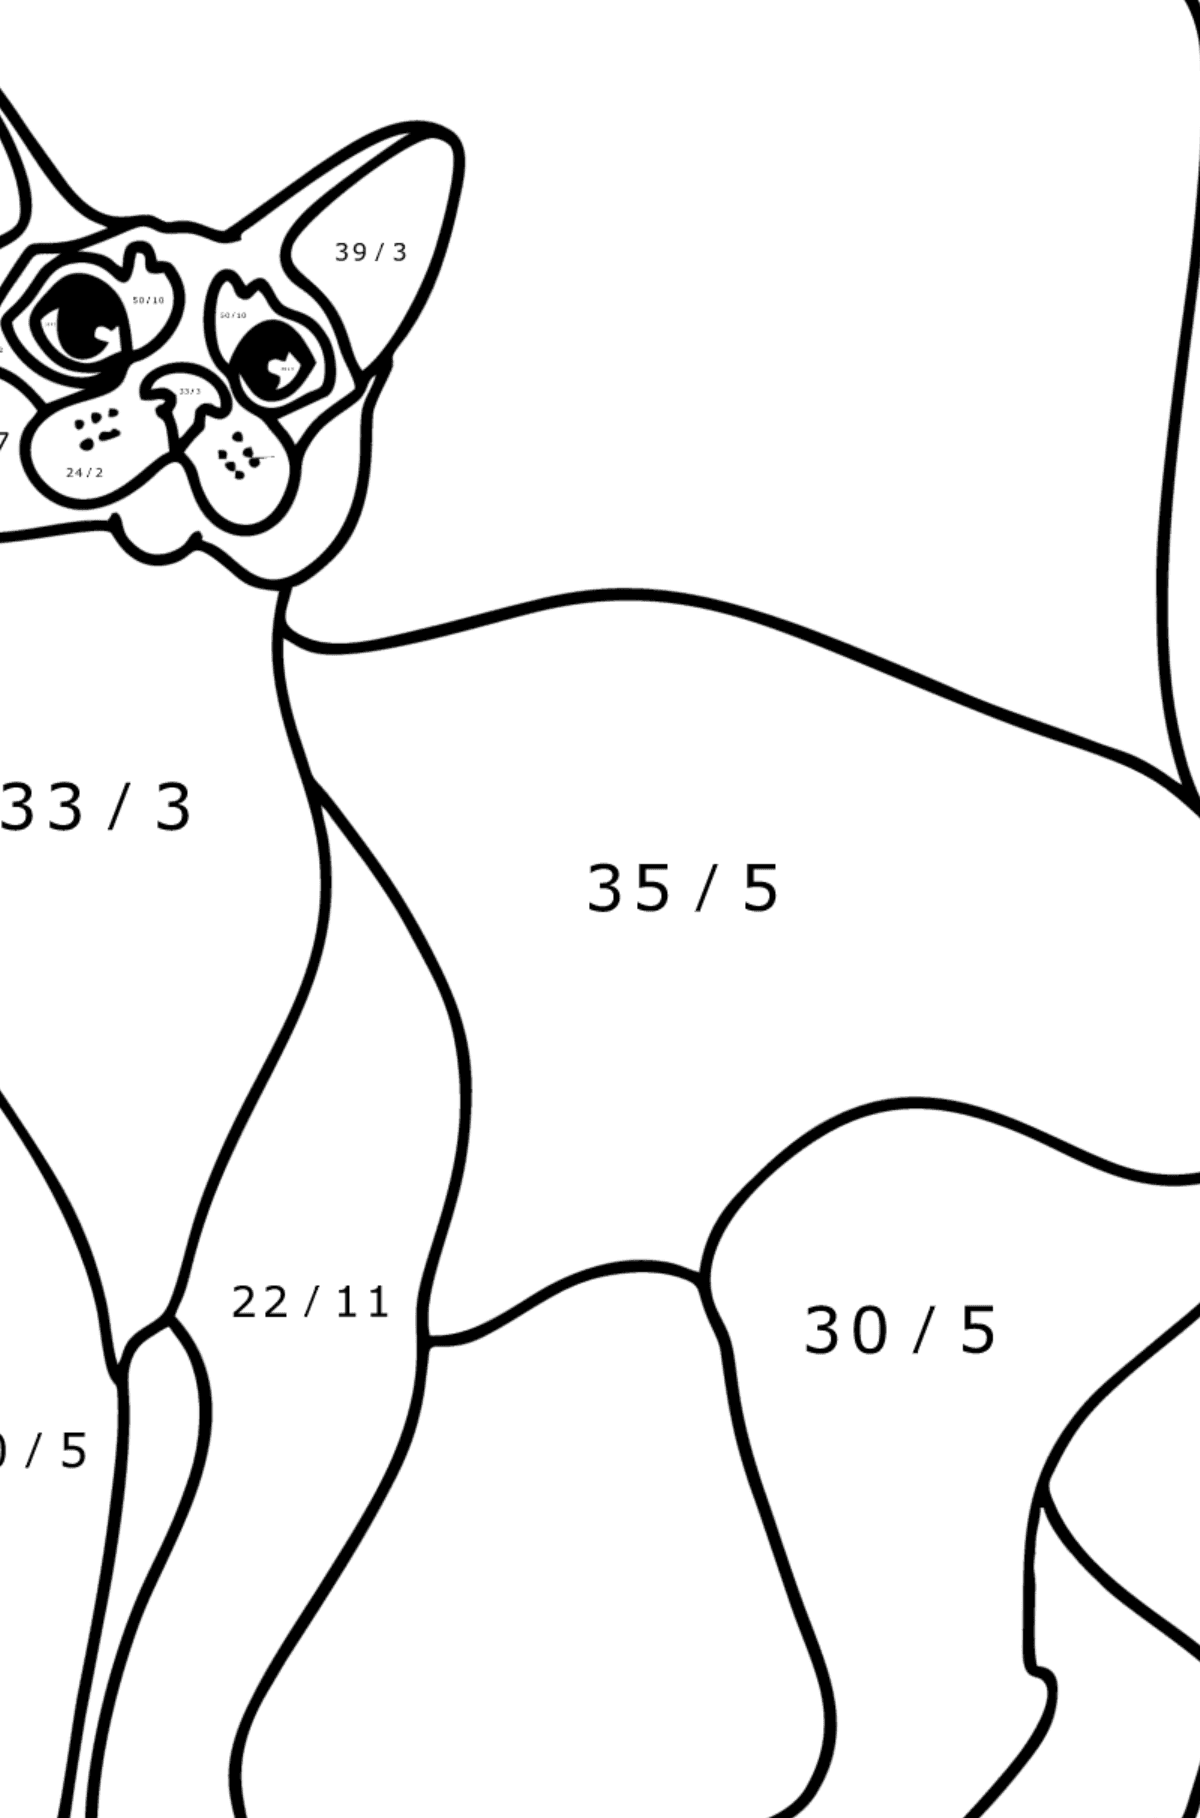 Abyssinian Cat coloring page - Math Coloring - Division for Kids